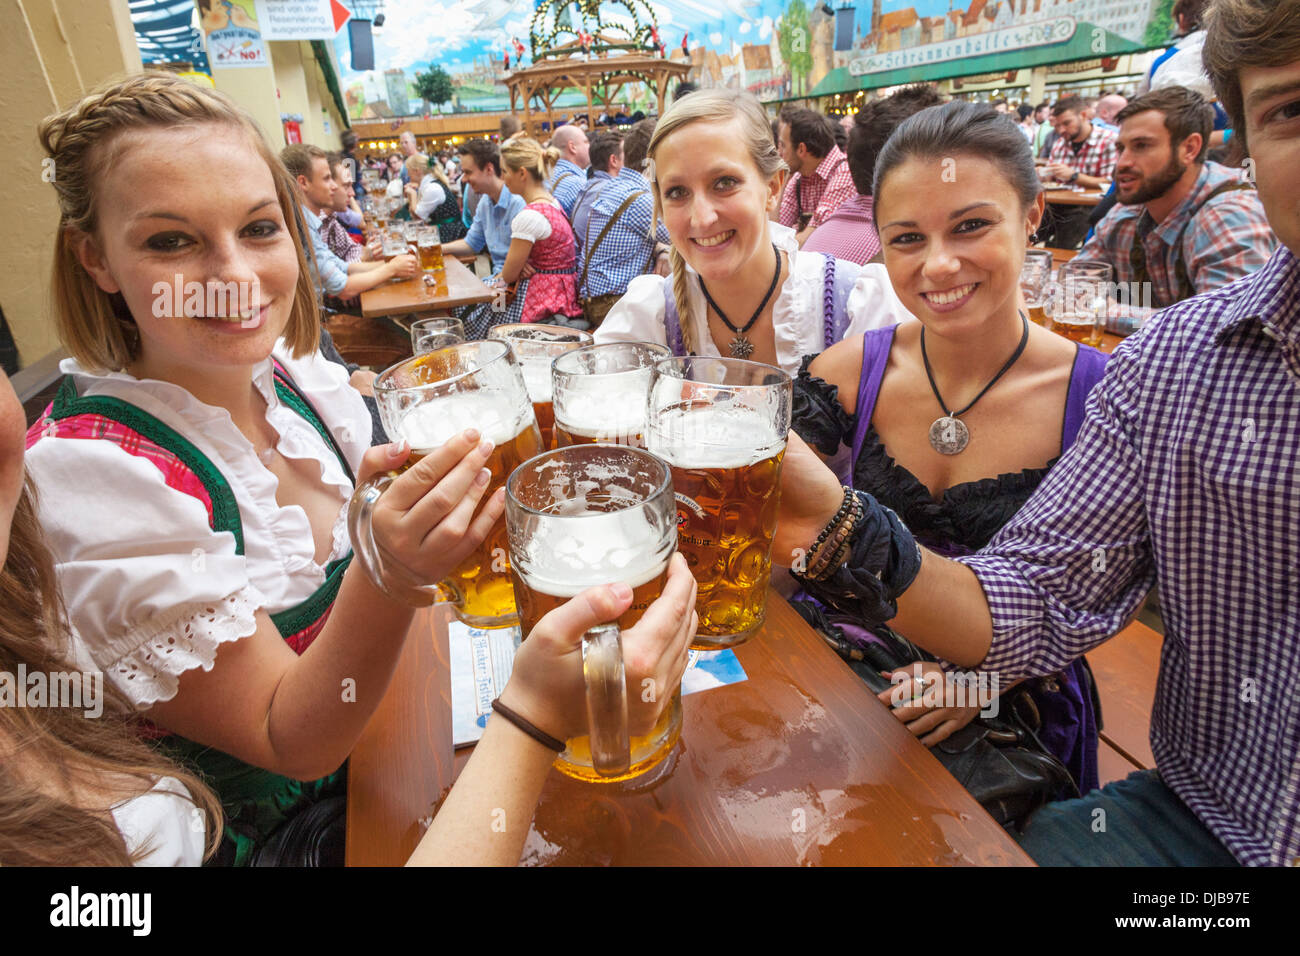 Germany, Bavaria, Munich, Oktoberfest, Young People Drinking Beer Stock ...